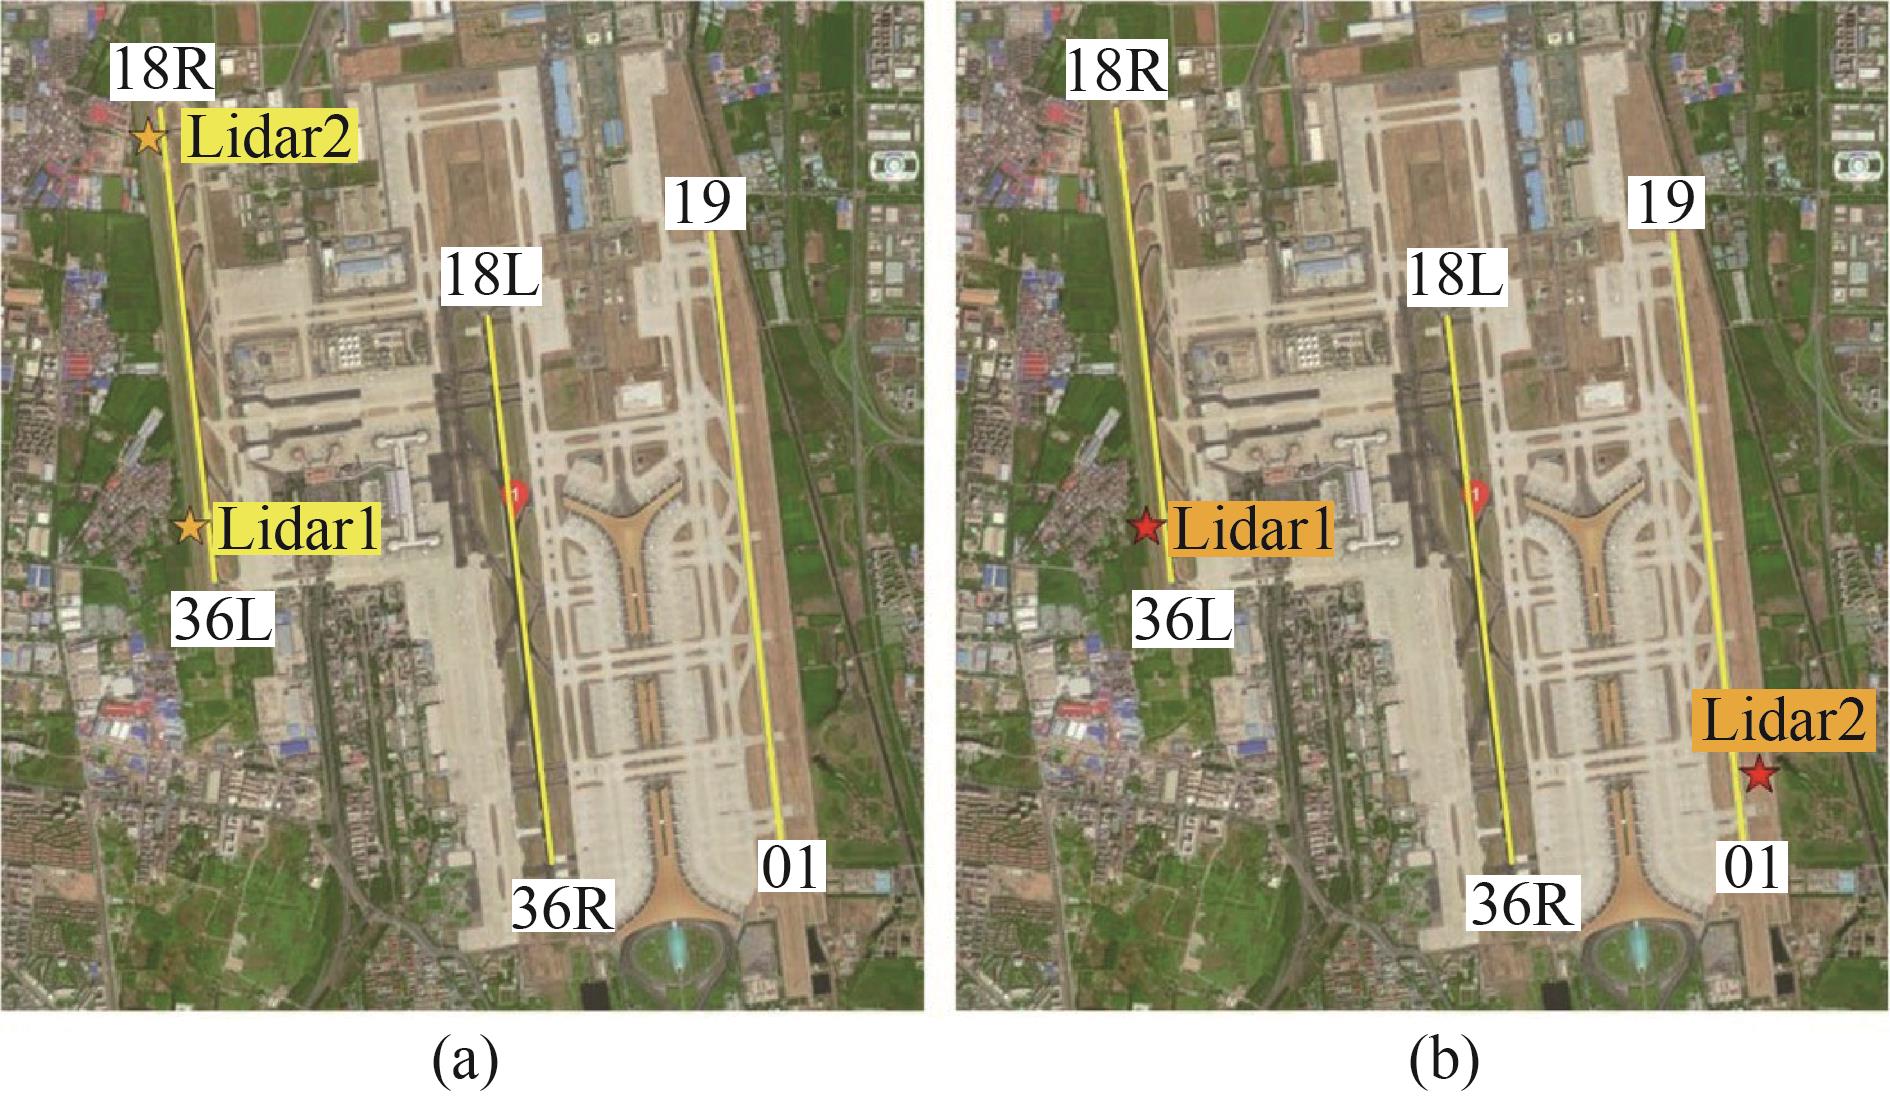 The geographical environment around Beijing Capital International Airport and locations of lidars (a) the first phase of experiment from January 2018 to October 2018,(b) the second phase of experiment from November 2018 to October 2019